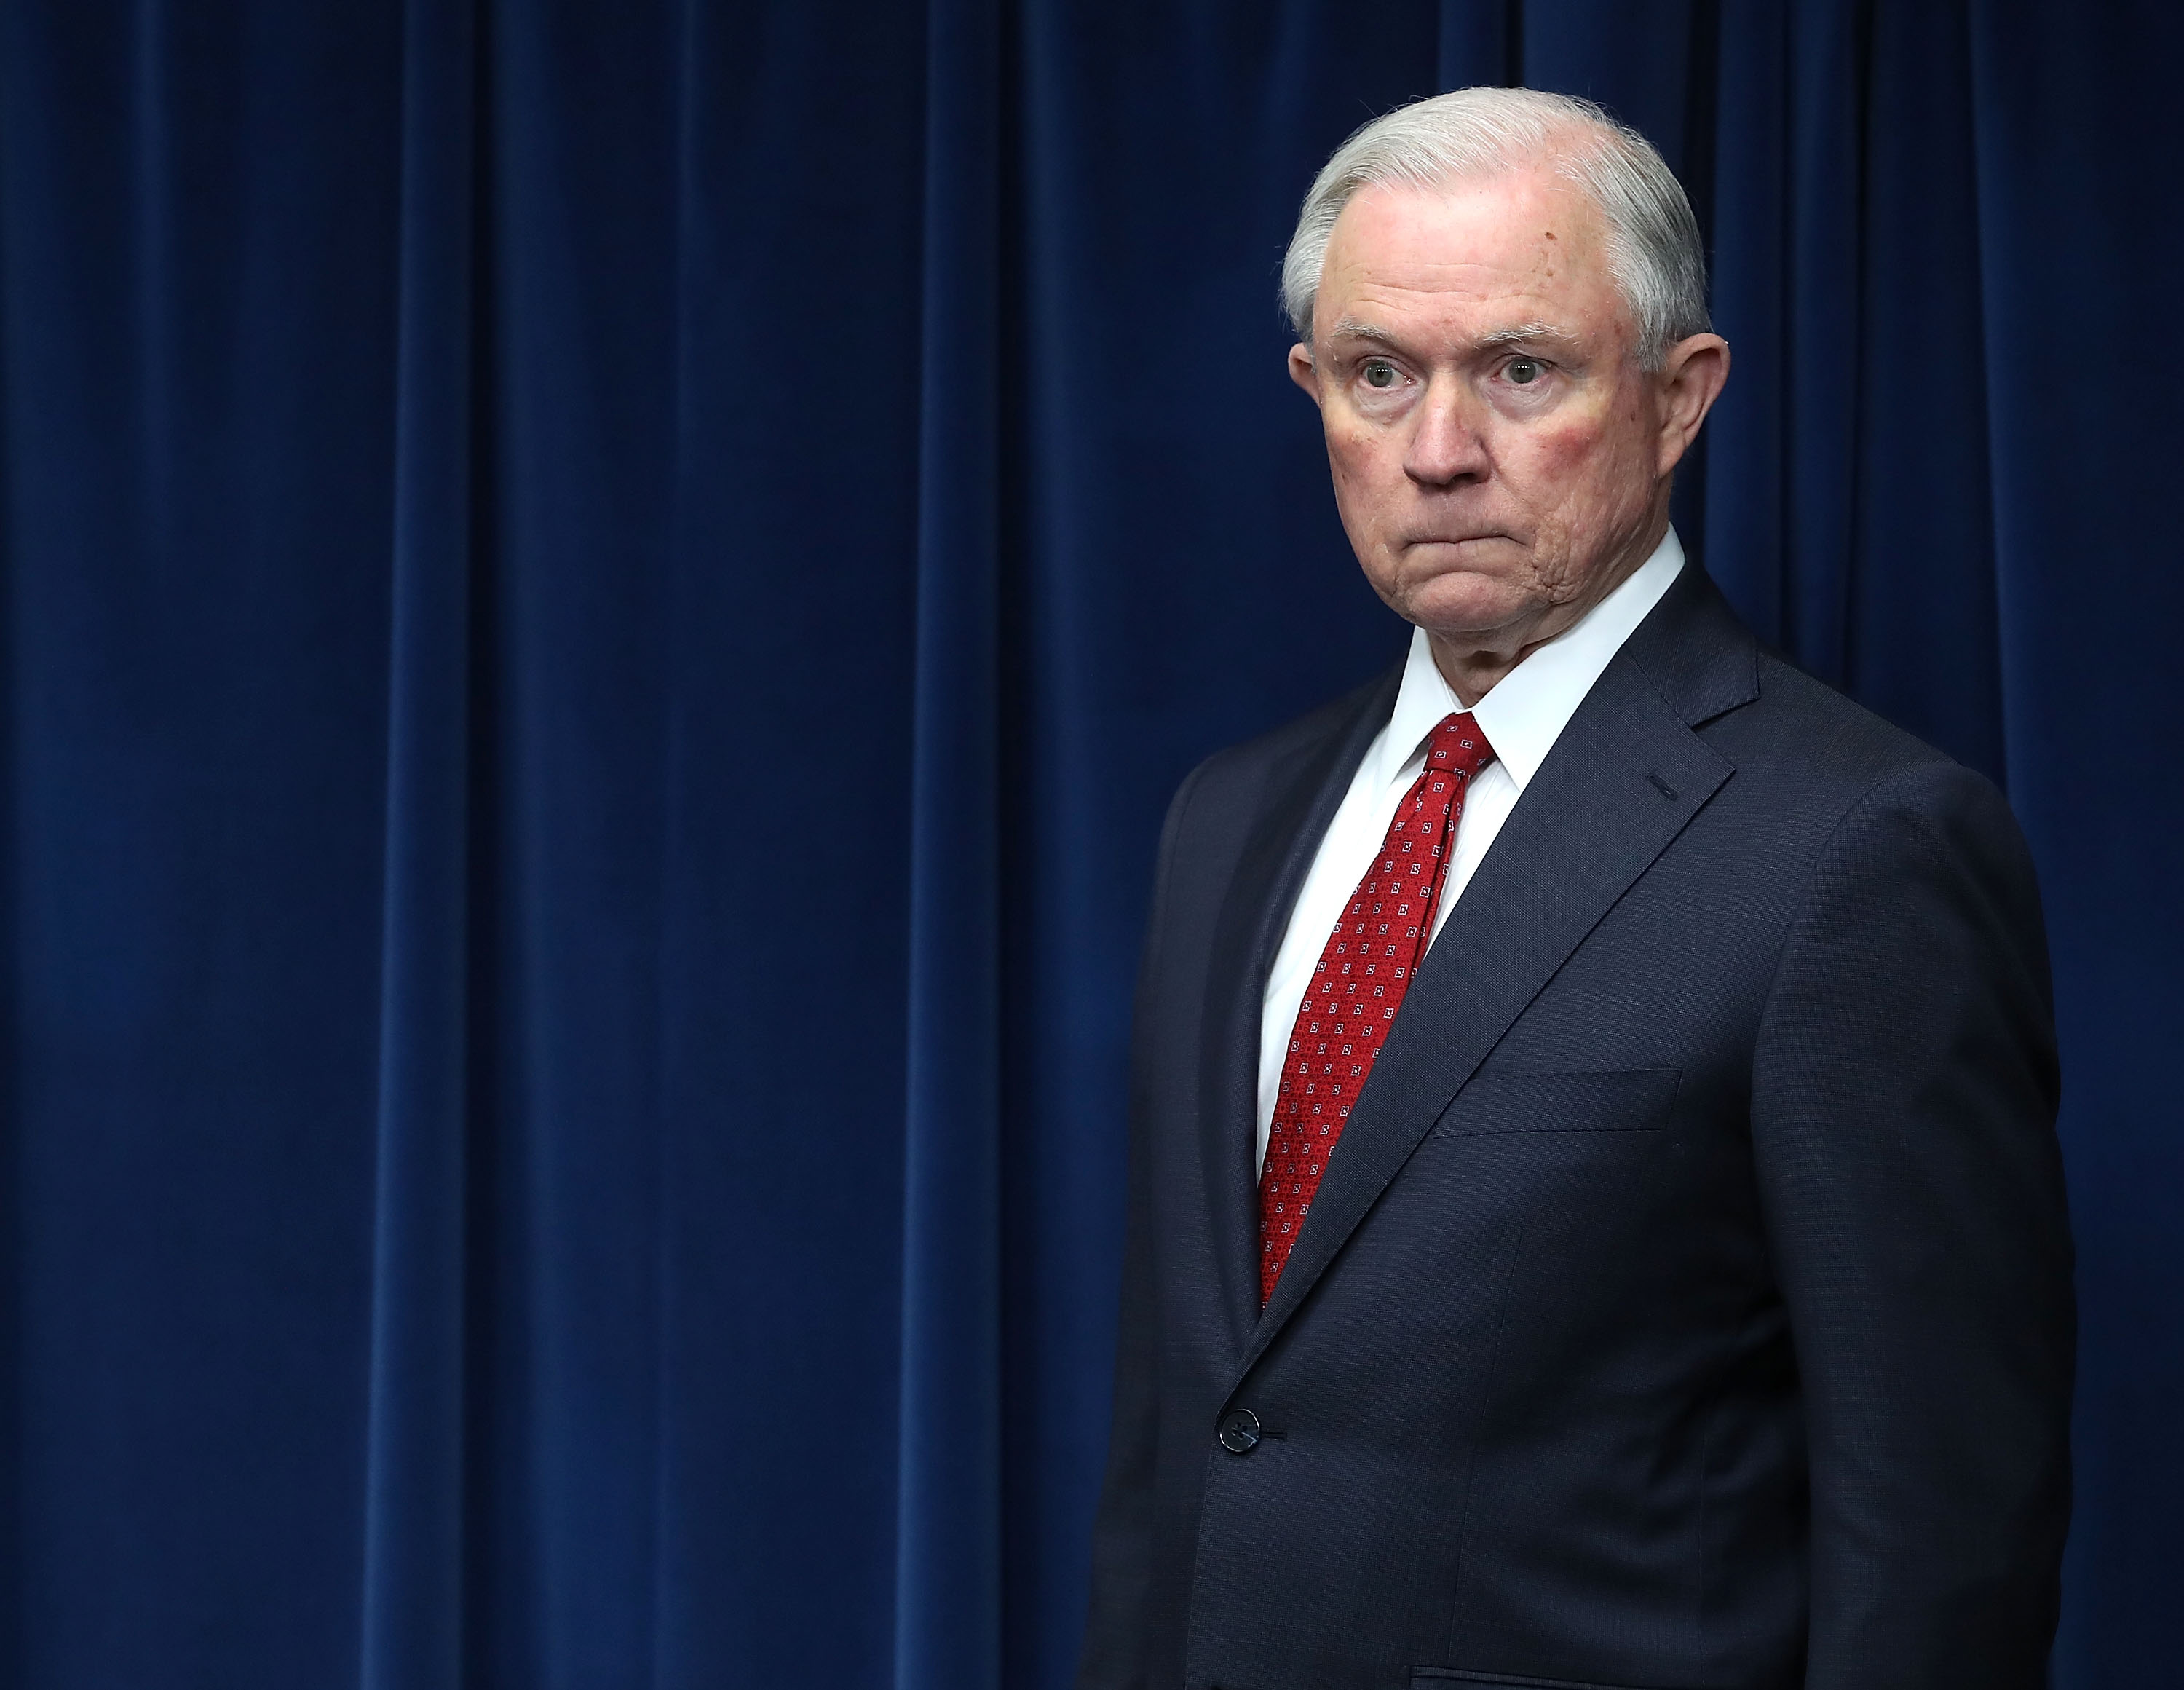 Jeff Sessions during a news conference at the U.S. Customs and Borders Protection headquarters, on March 6, 2017 in Washington, DC. (Mark Wilson—Getty Images)